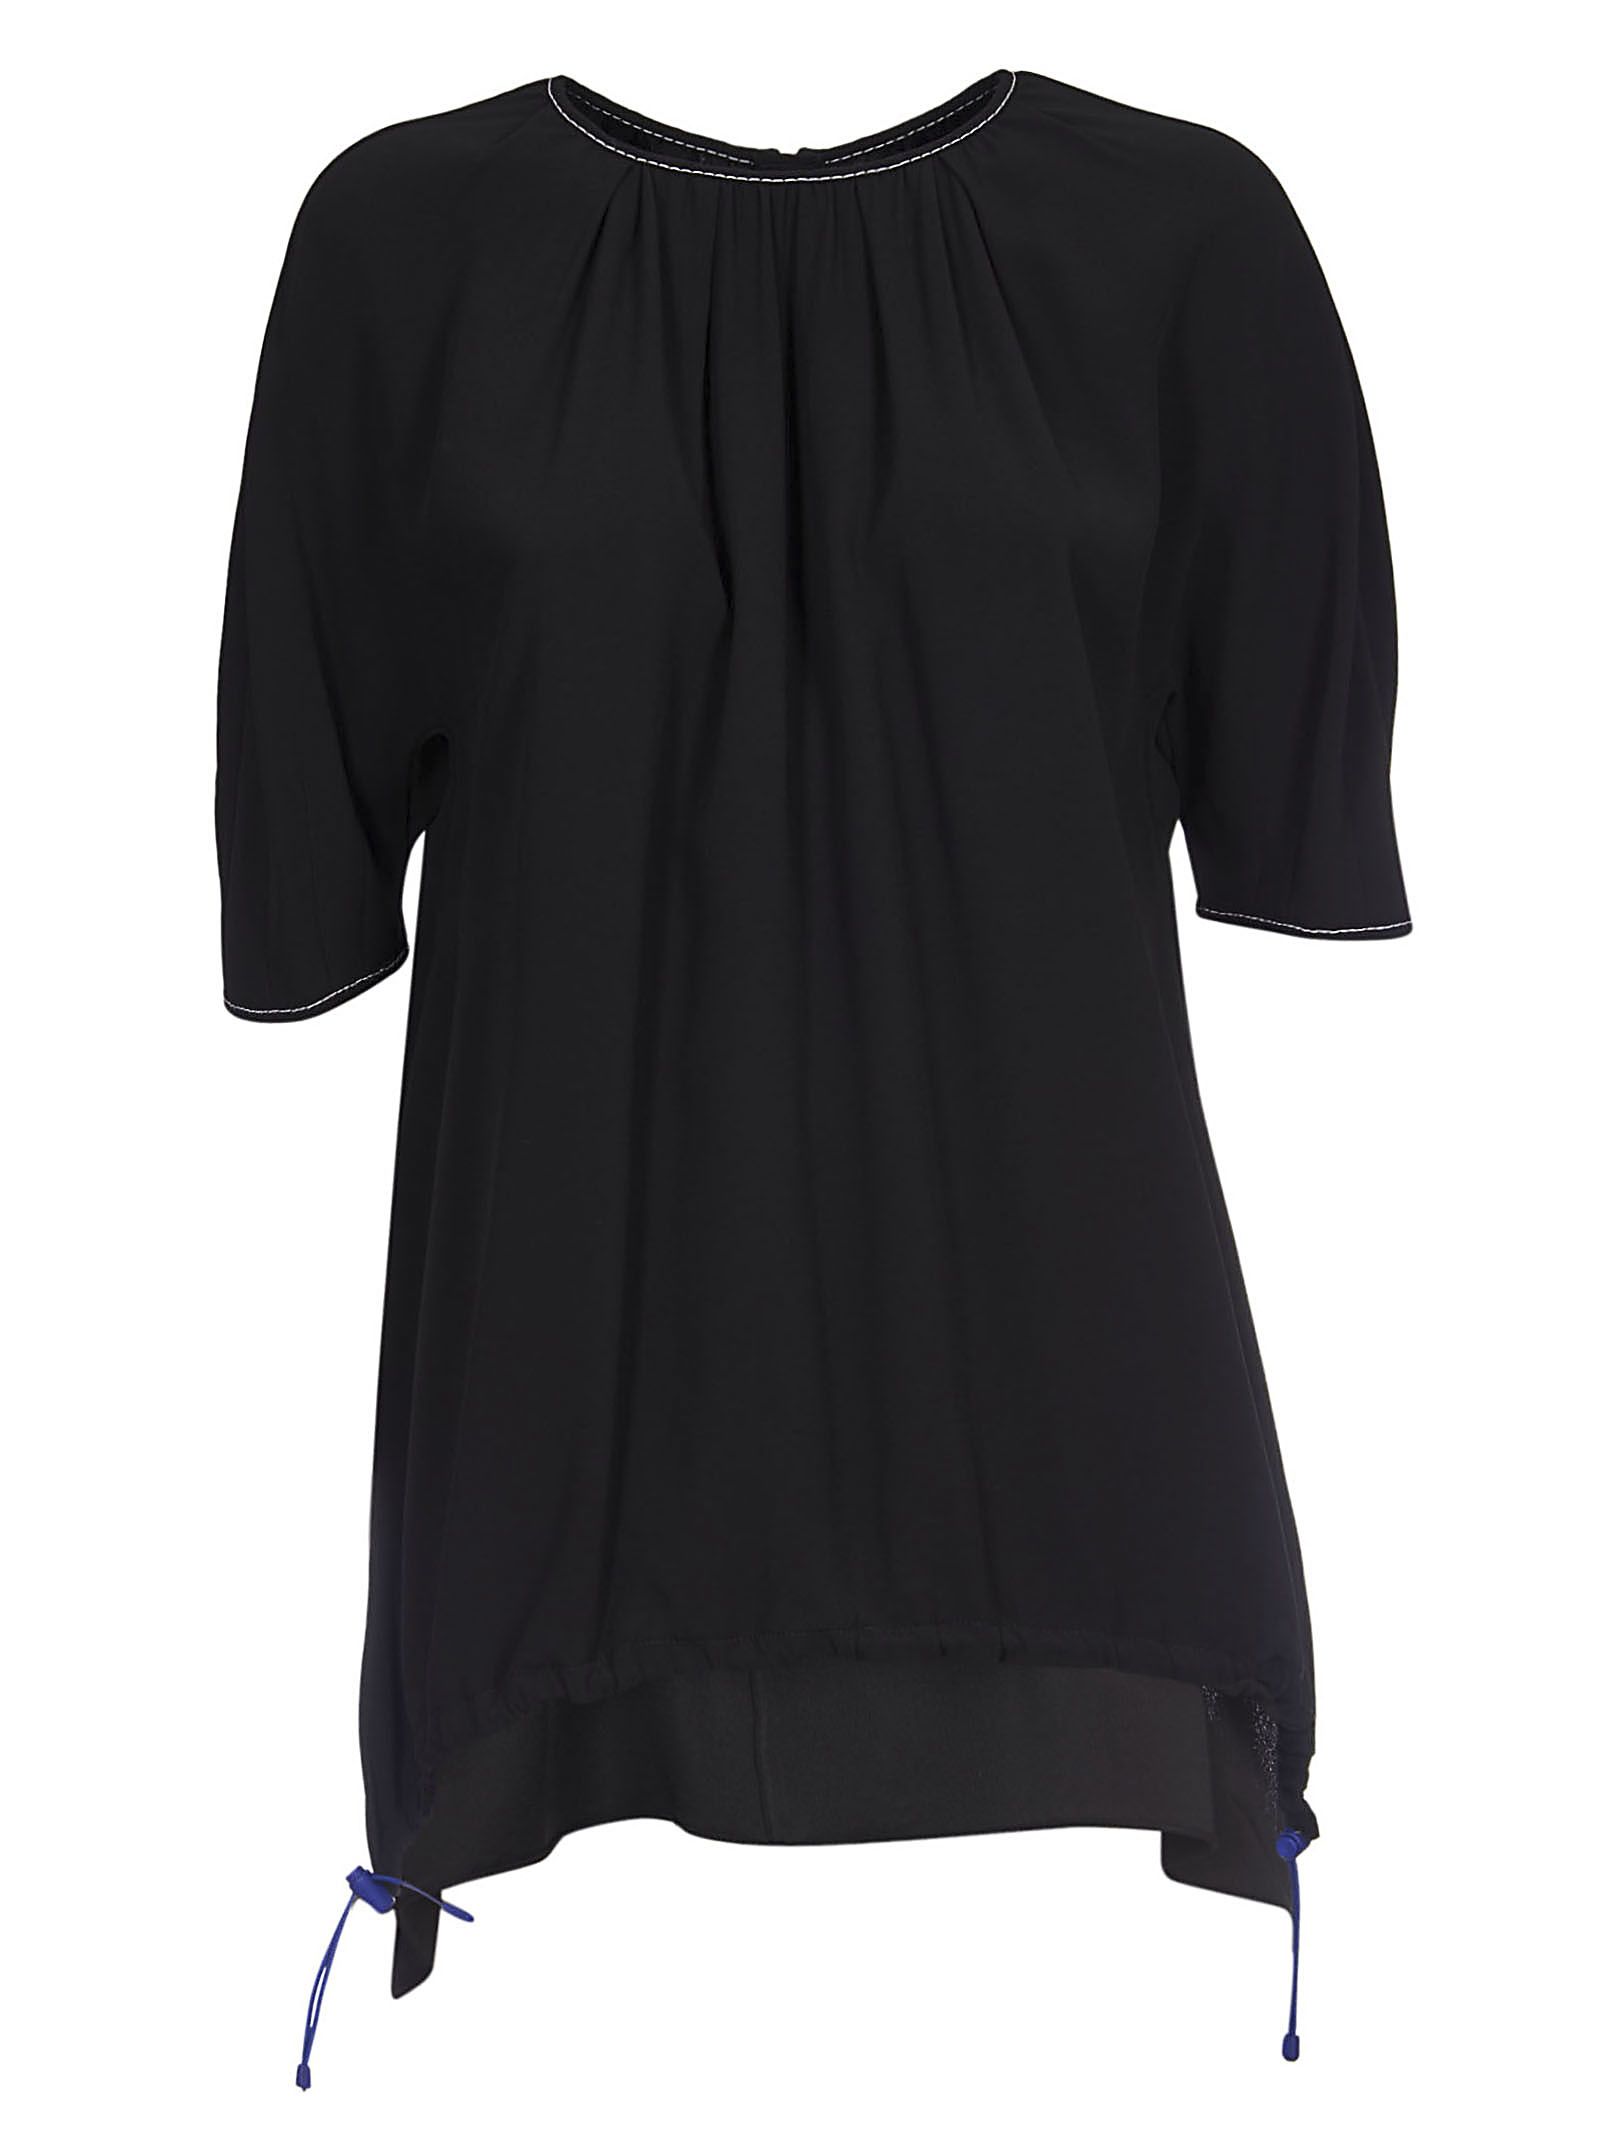 italist | Best price in the market for Marni Marni Stitch Detail Blouse ...